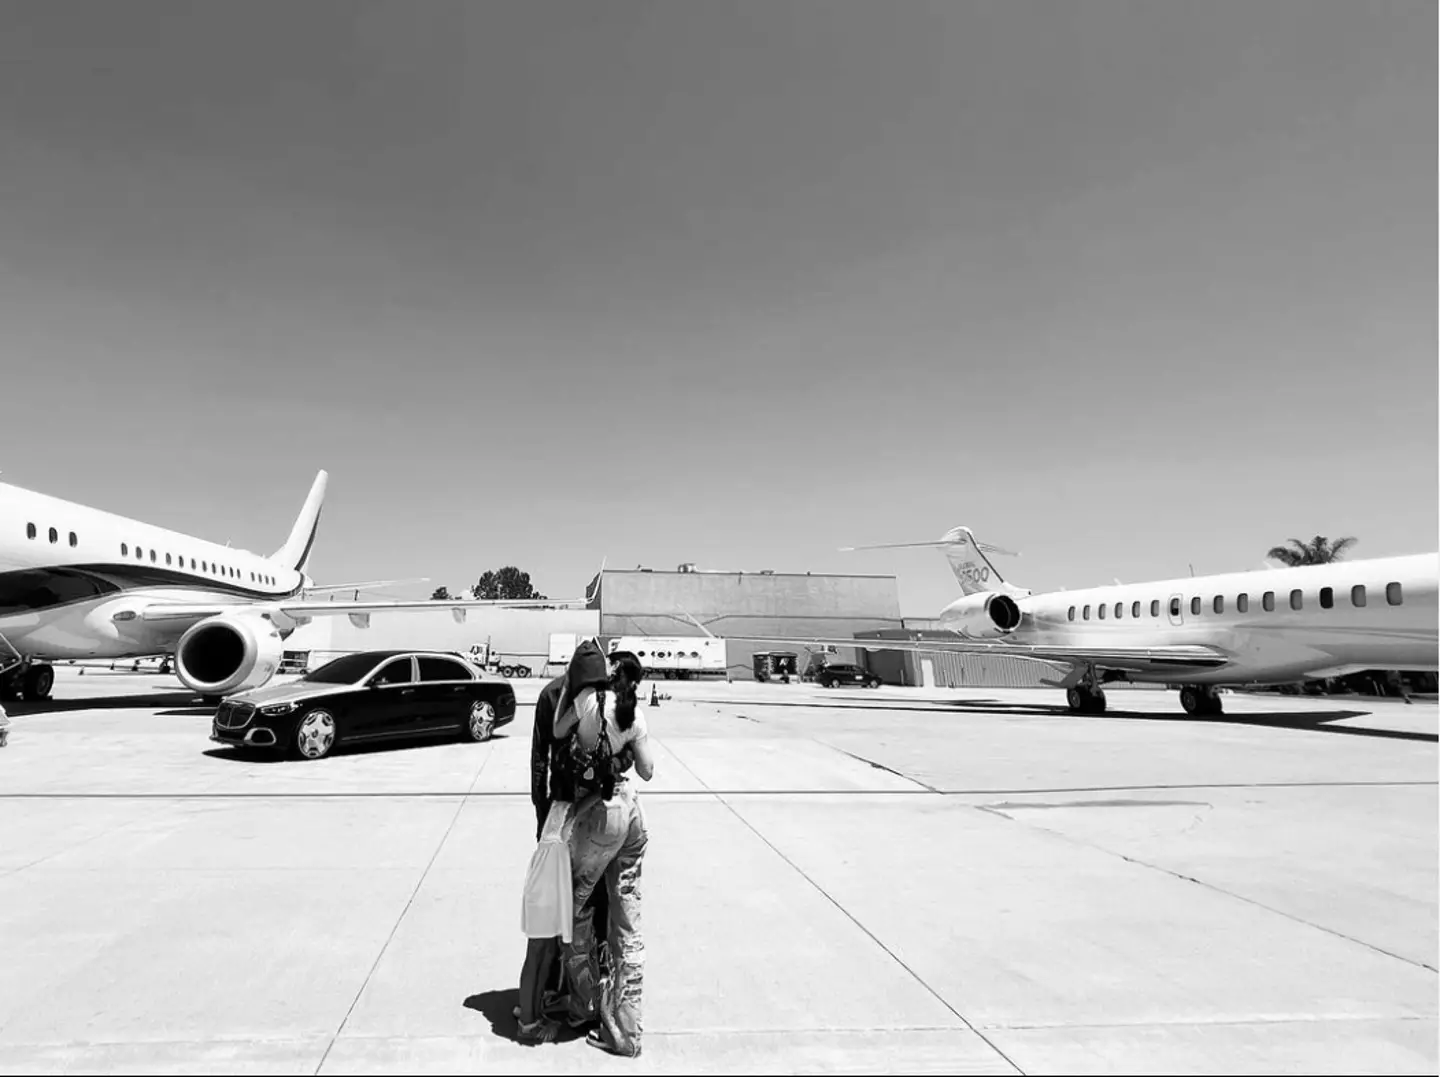 Kylie Jenner posted the photo of her and Travis Scott over the weekend.